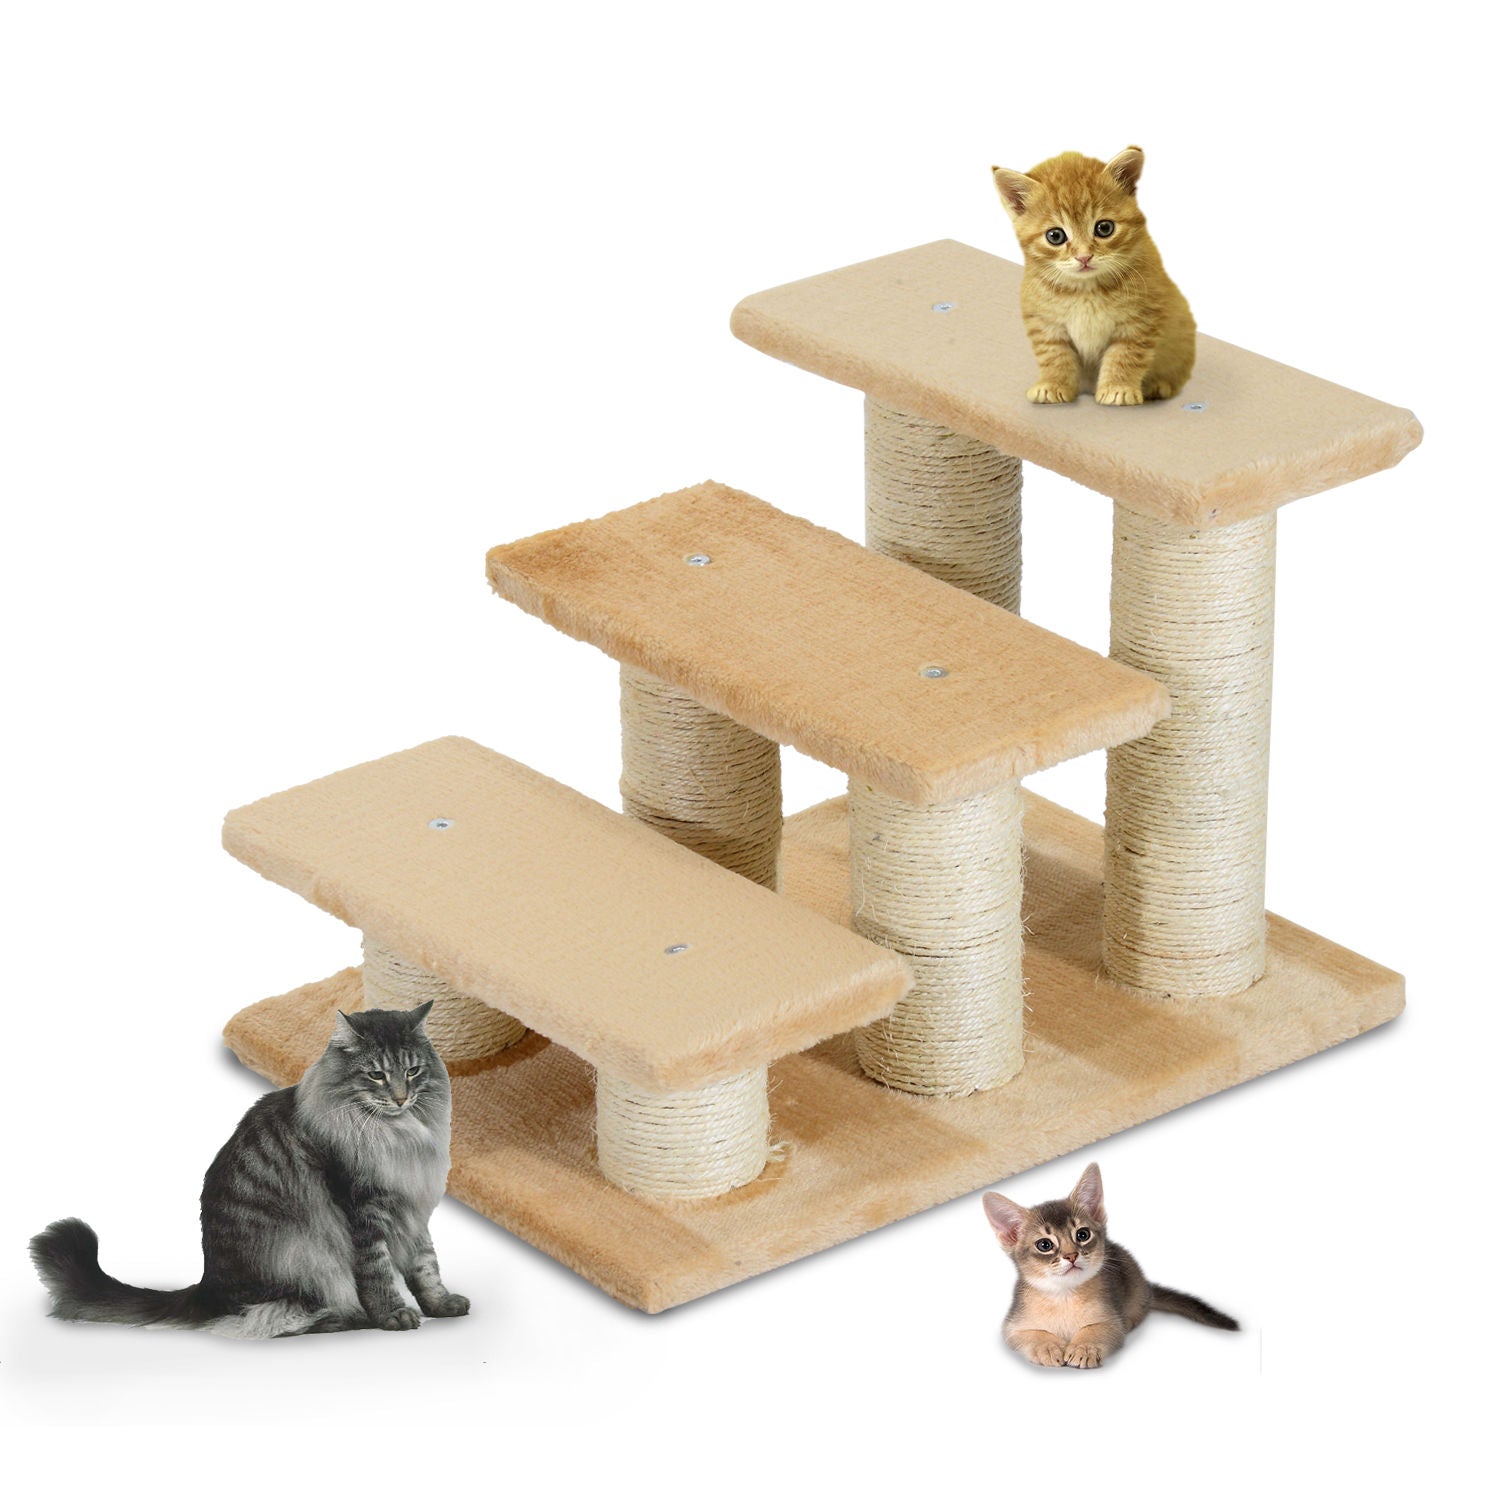 Cats 3-Tier Particle Board Stair Scratch Tree Beige